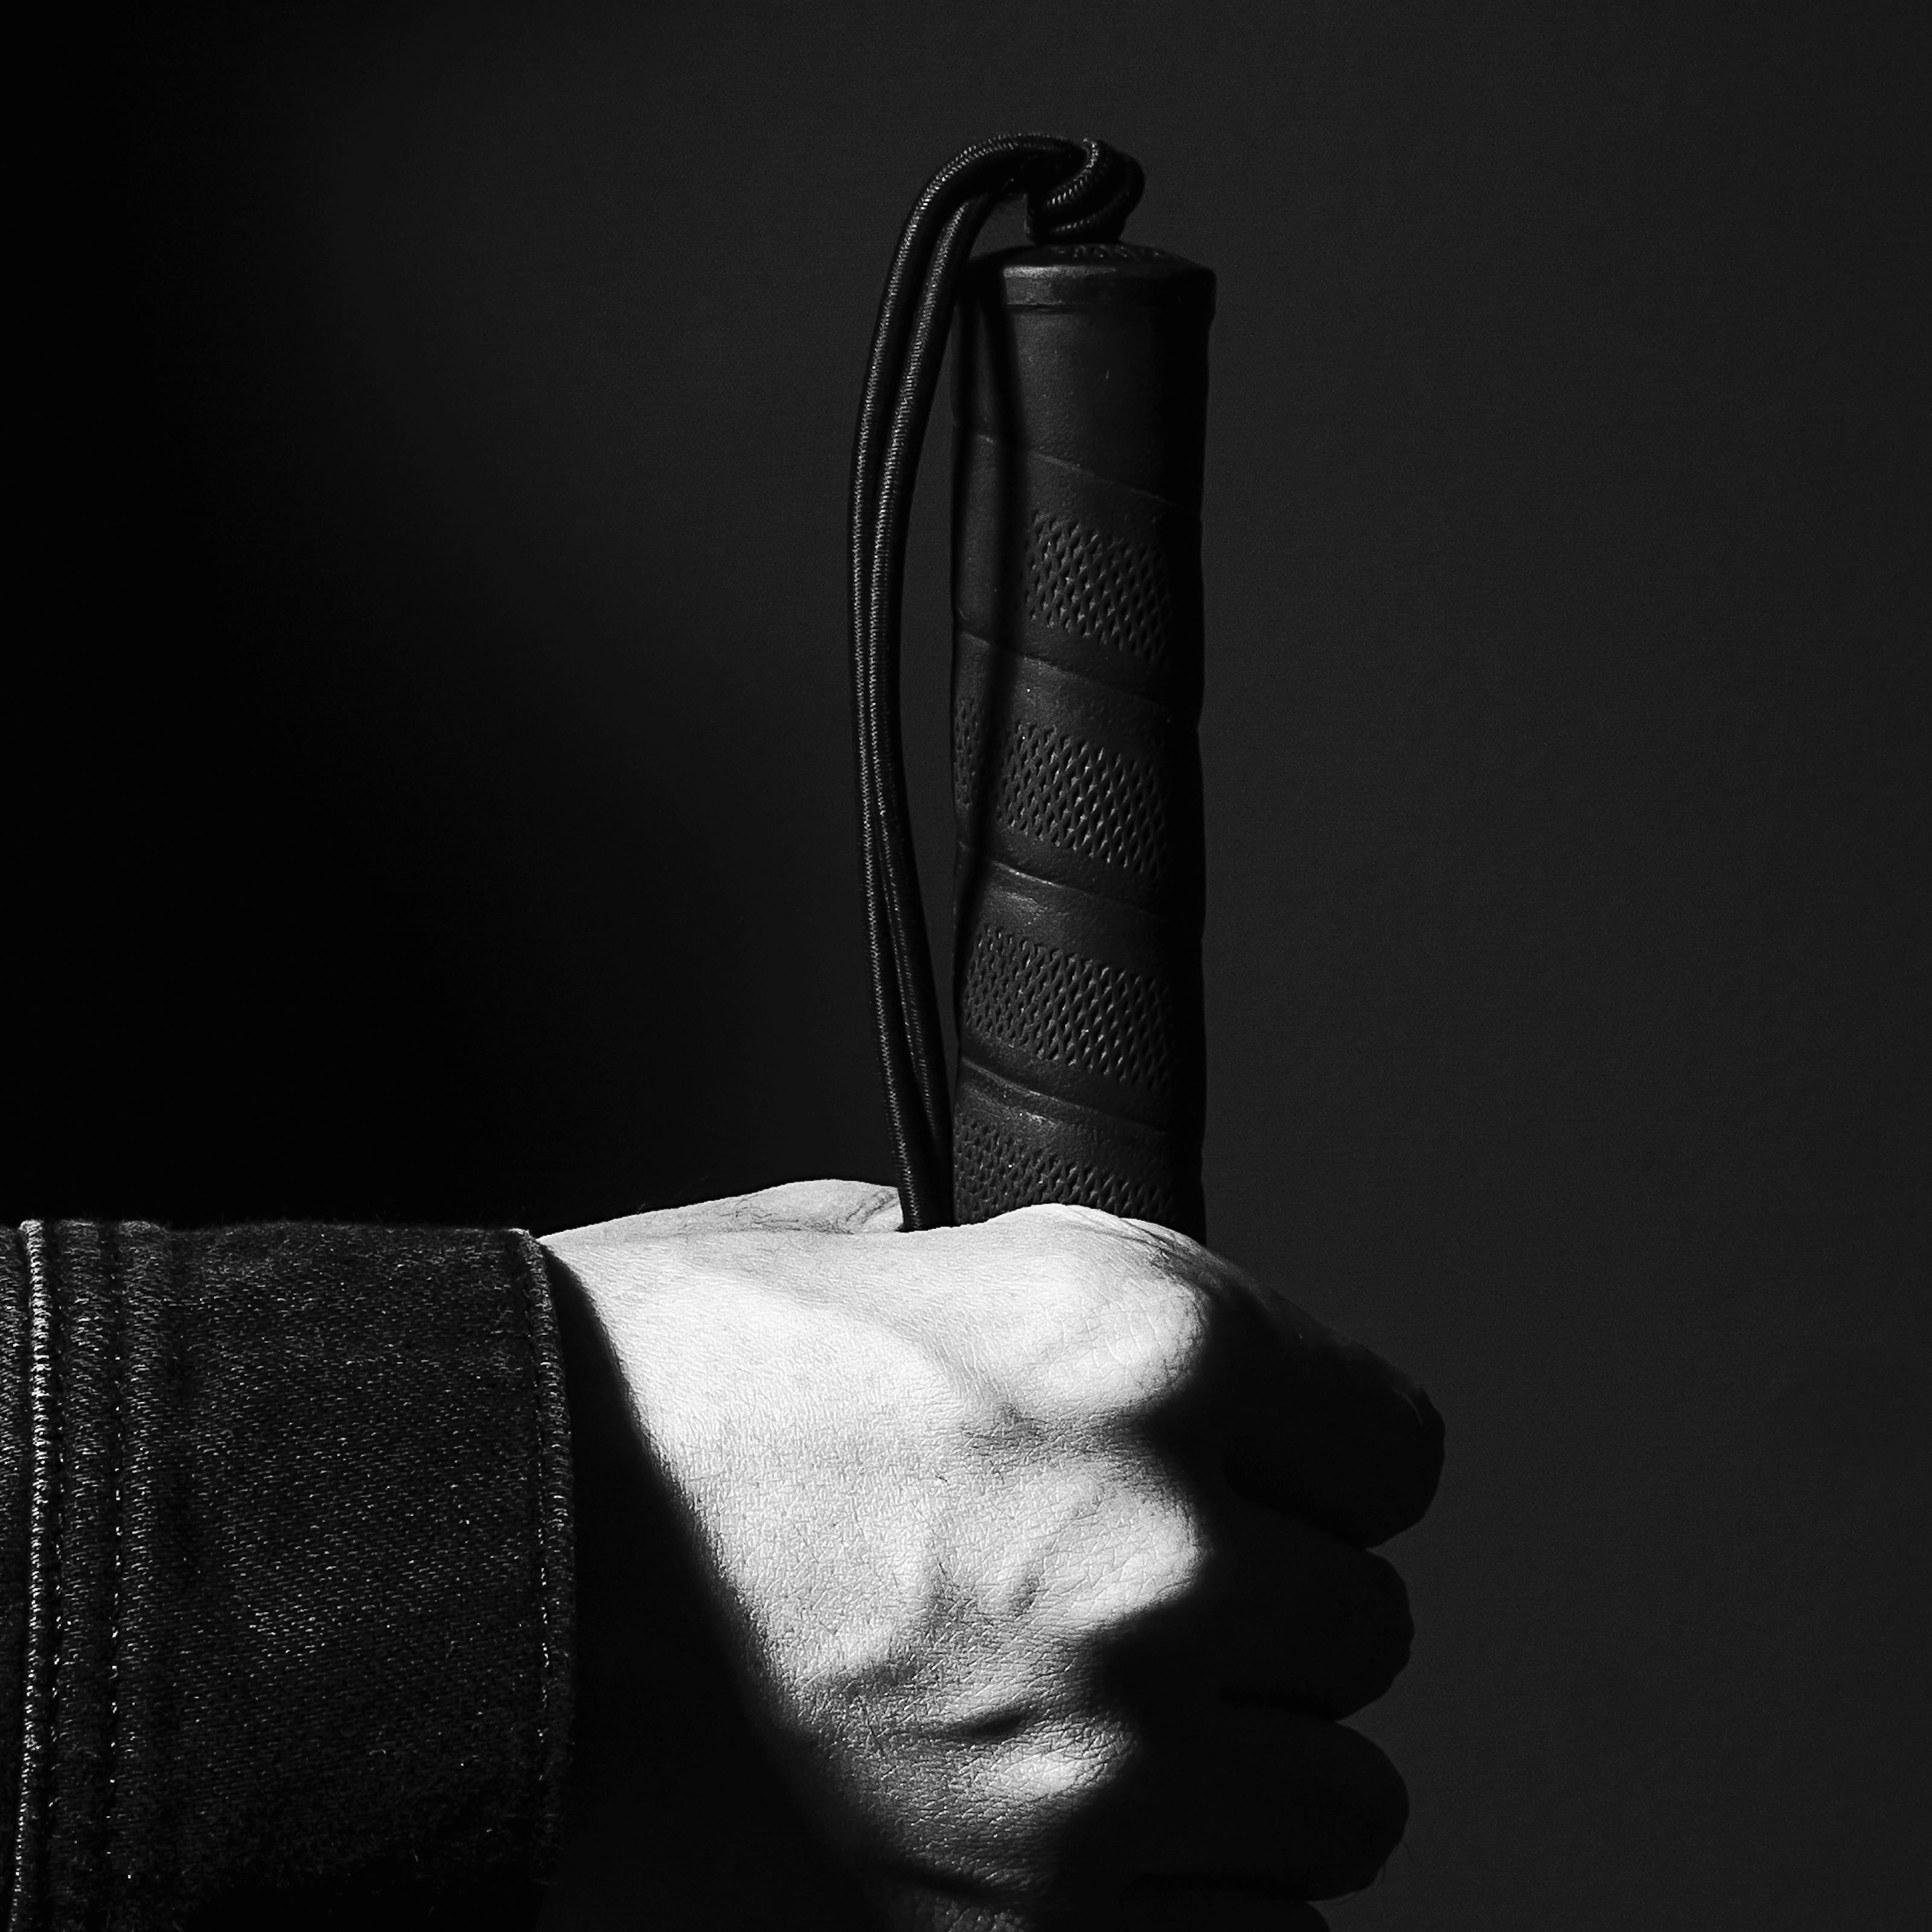 Black and white photograph of a hand holing the rubber handle of a white cane such that the cane is vertical. The image is close-up on the hand so that all that can be seen is the cuff of the person's denim jacket. The background is a dark grey making the hand and handle a stark feature within the image.